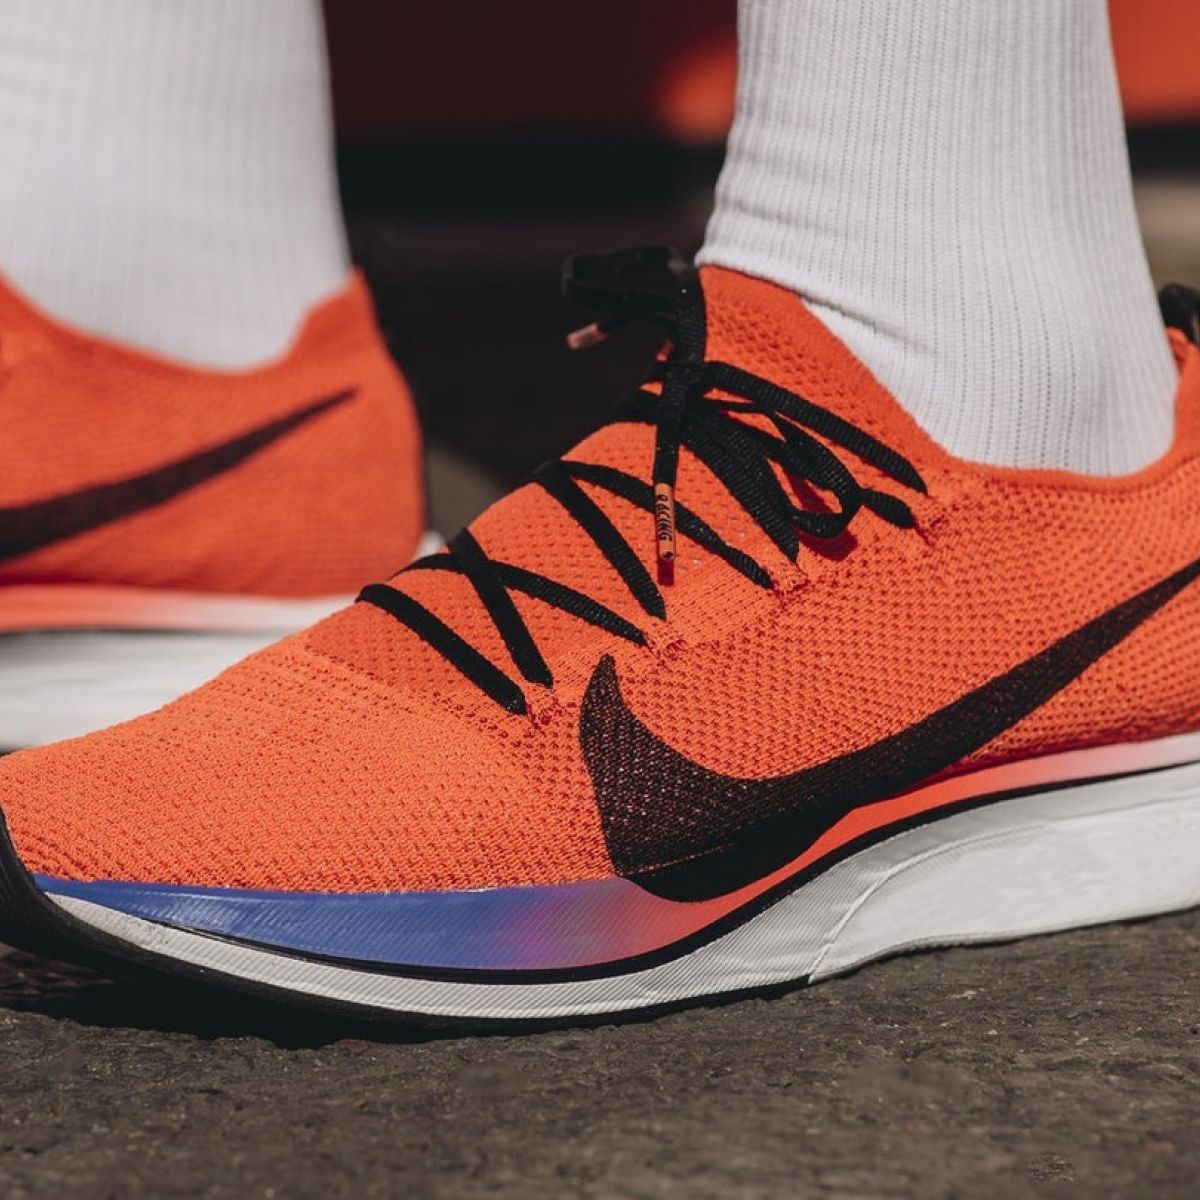 Will Nike Vaporfly help me run faster 